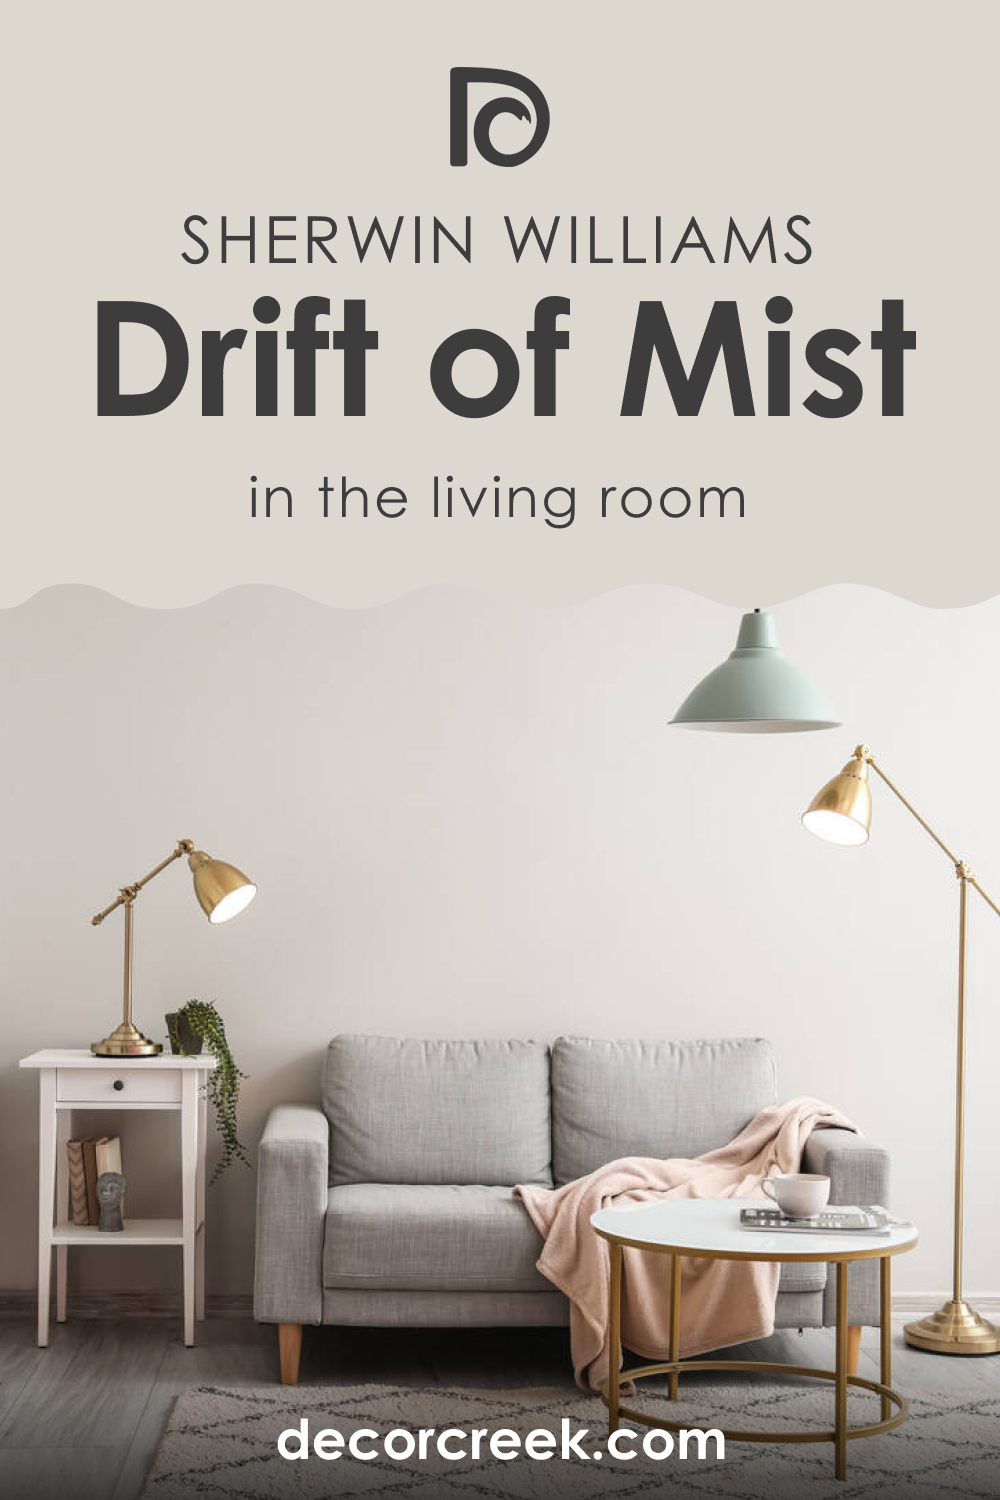 How to Use SW 9166 Drift of Mist in the Living Room?